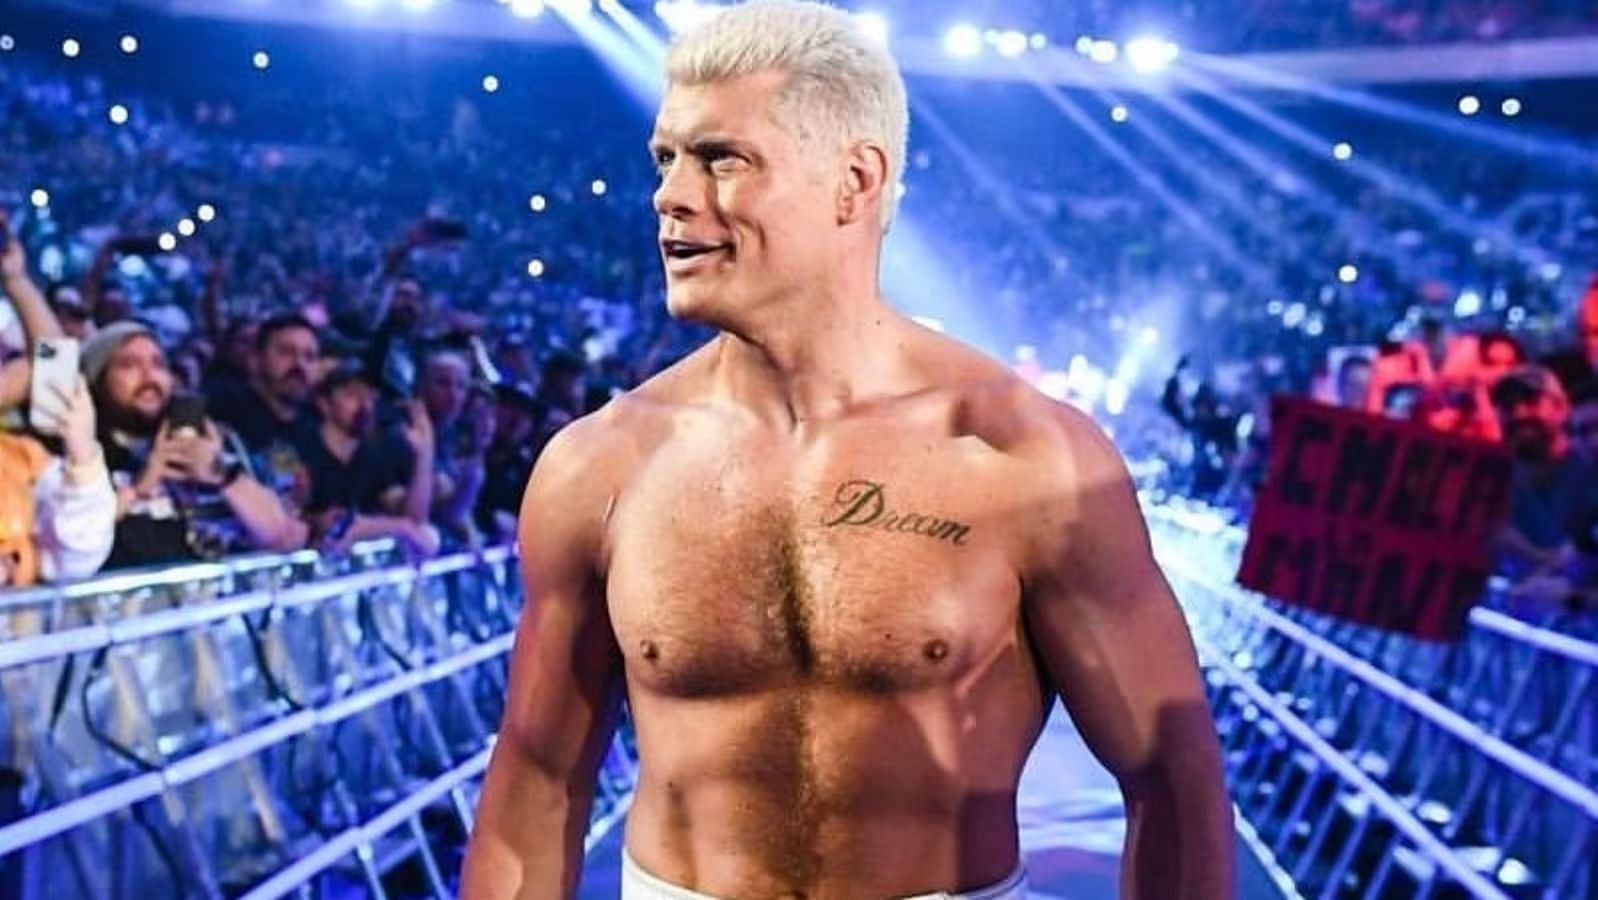 Cody Rhodes reacted to the AEW reference